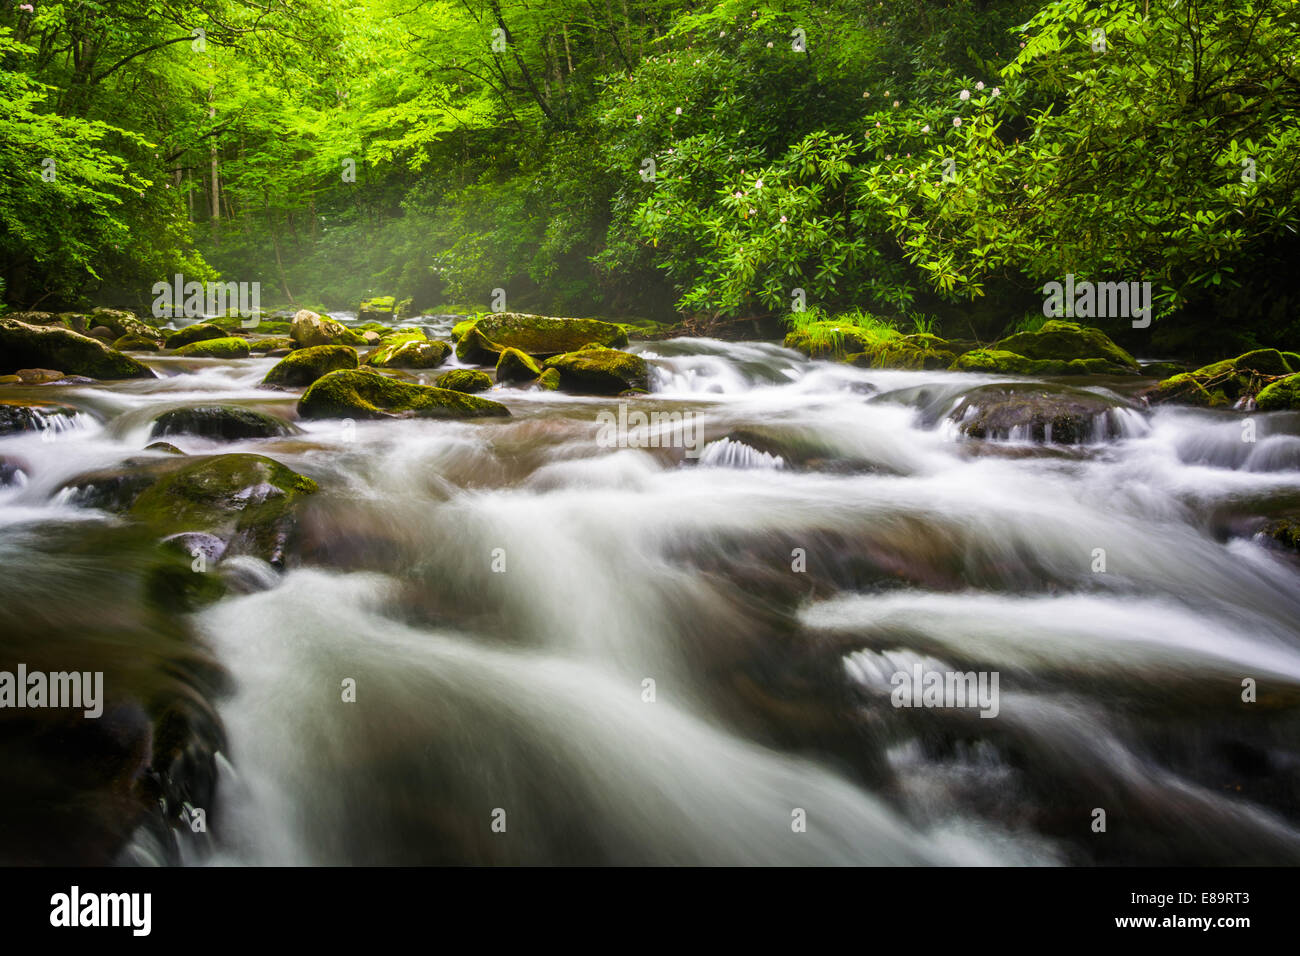 Le cascate del fiume Oconaluftee, a Great Smoky Mountains National Park, North Carolina. Foto Stock